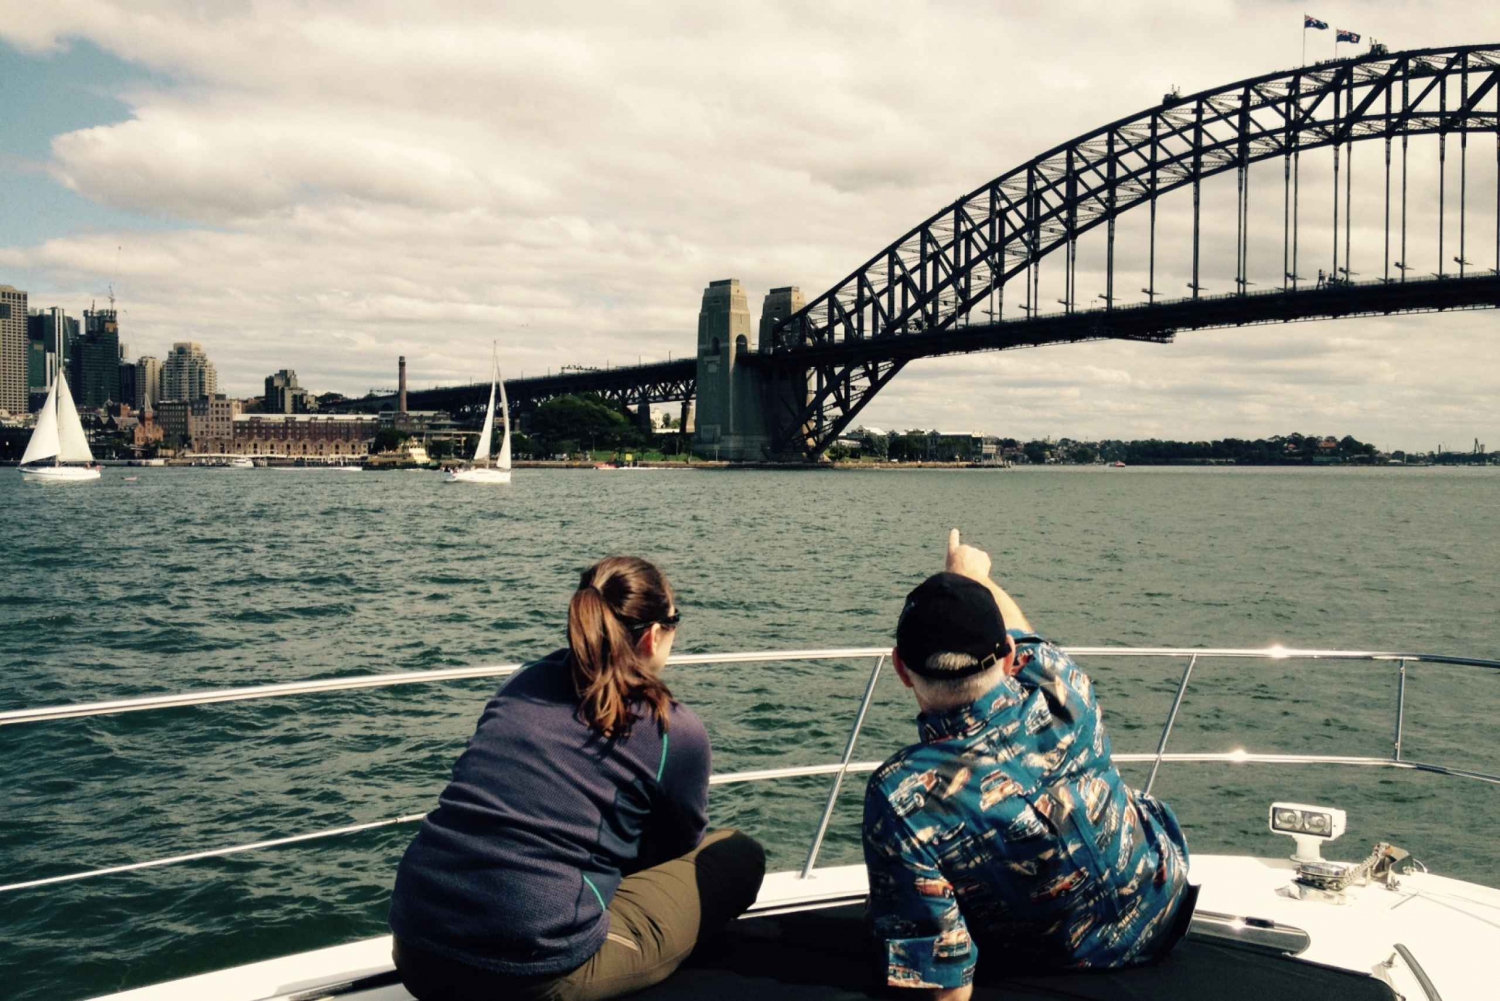 Sydney: Harbor Cruise with Gourmet Lunch and Beverages